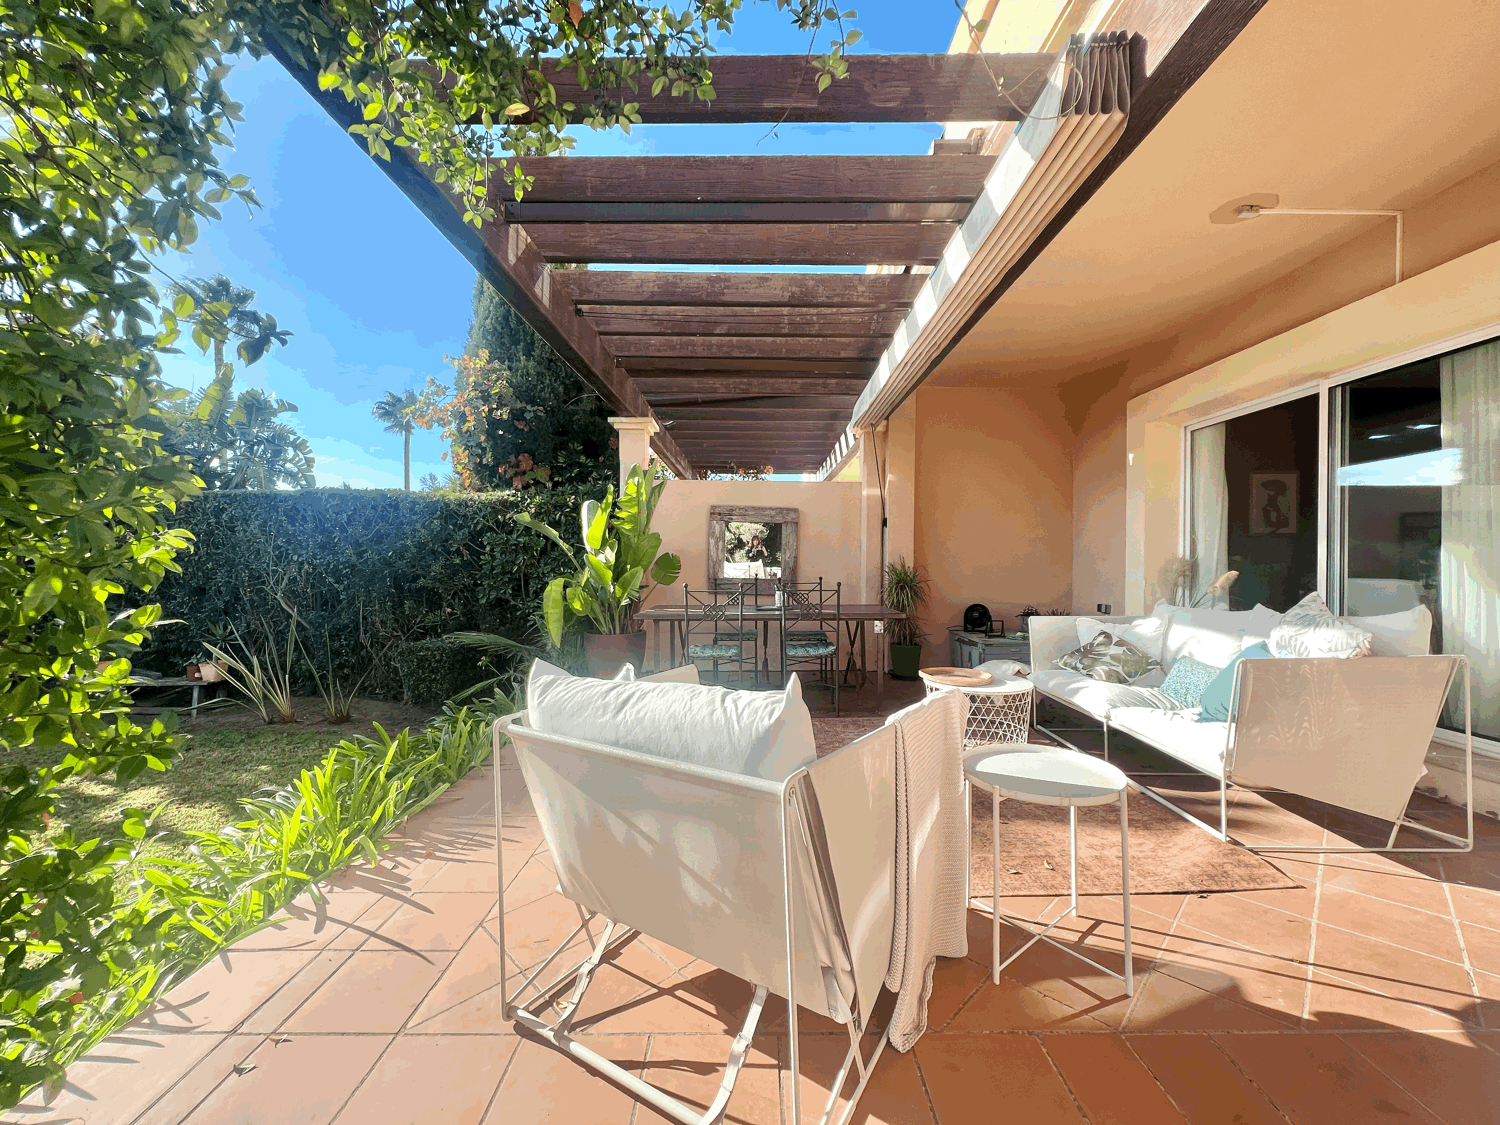 Beautiful three-bedroom semi-detached house a few meters away from the beach in Alcaidesa